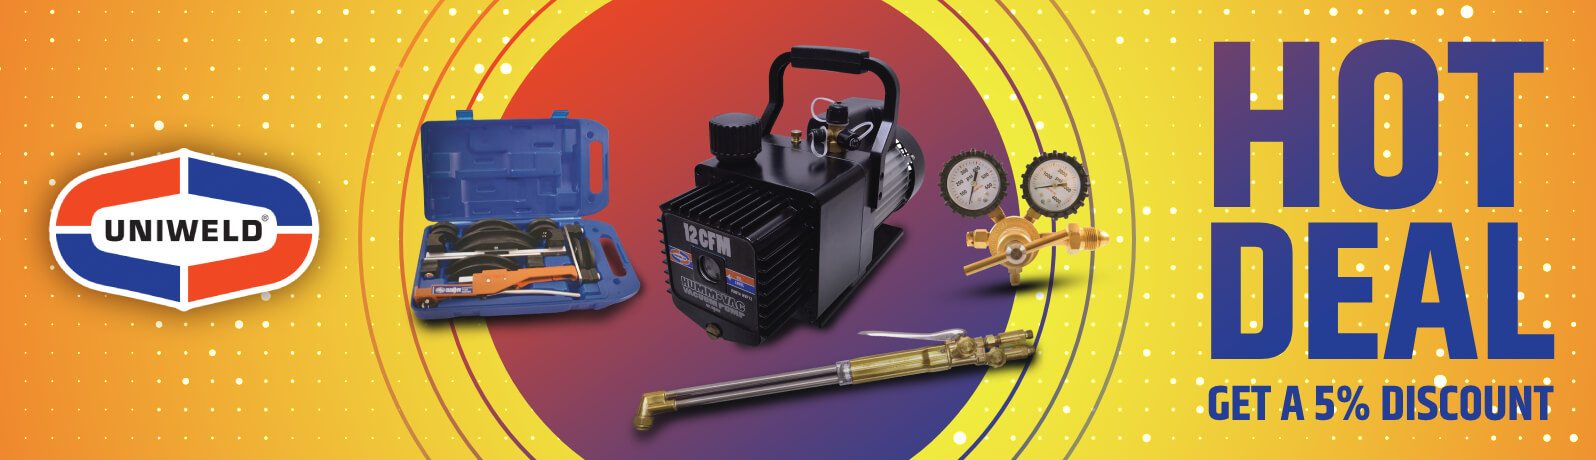 Get a 5% Discount on Your Selected Uniweld Products Purchase of $300 or more!